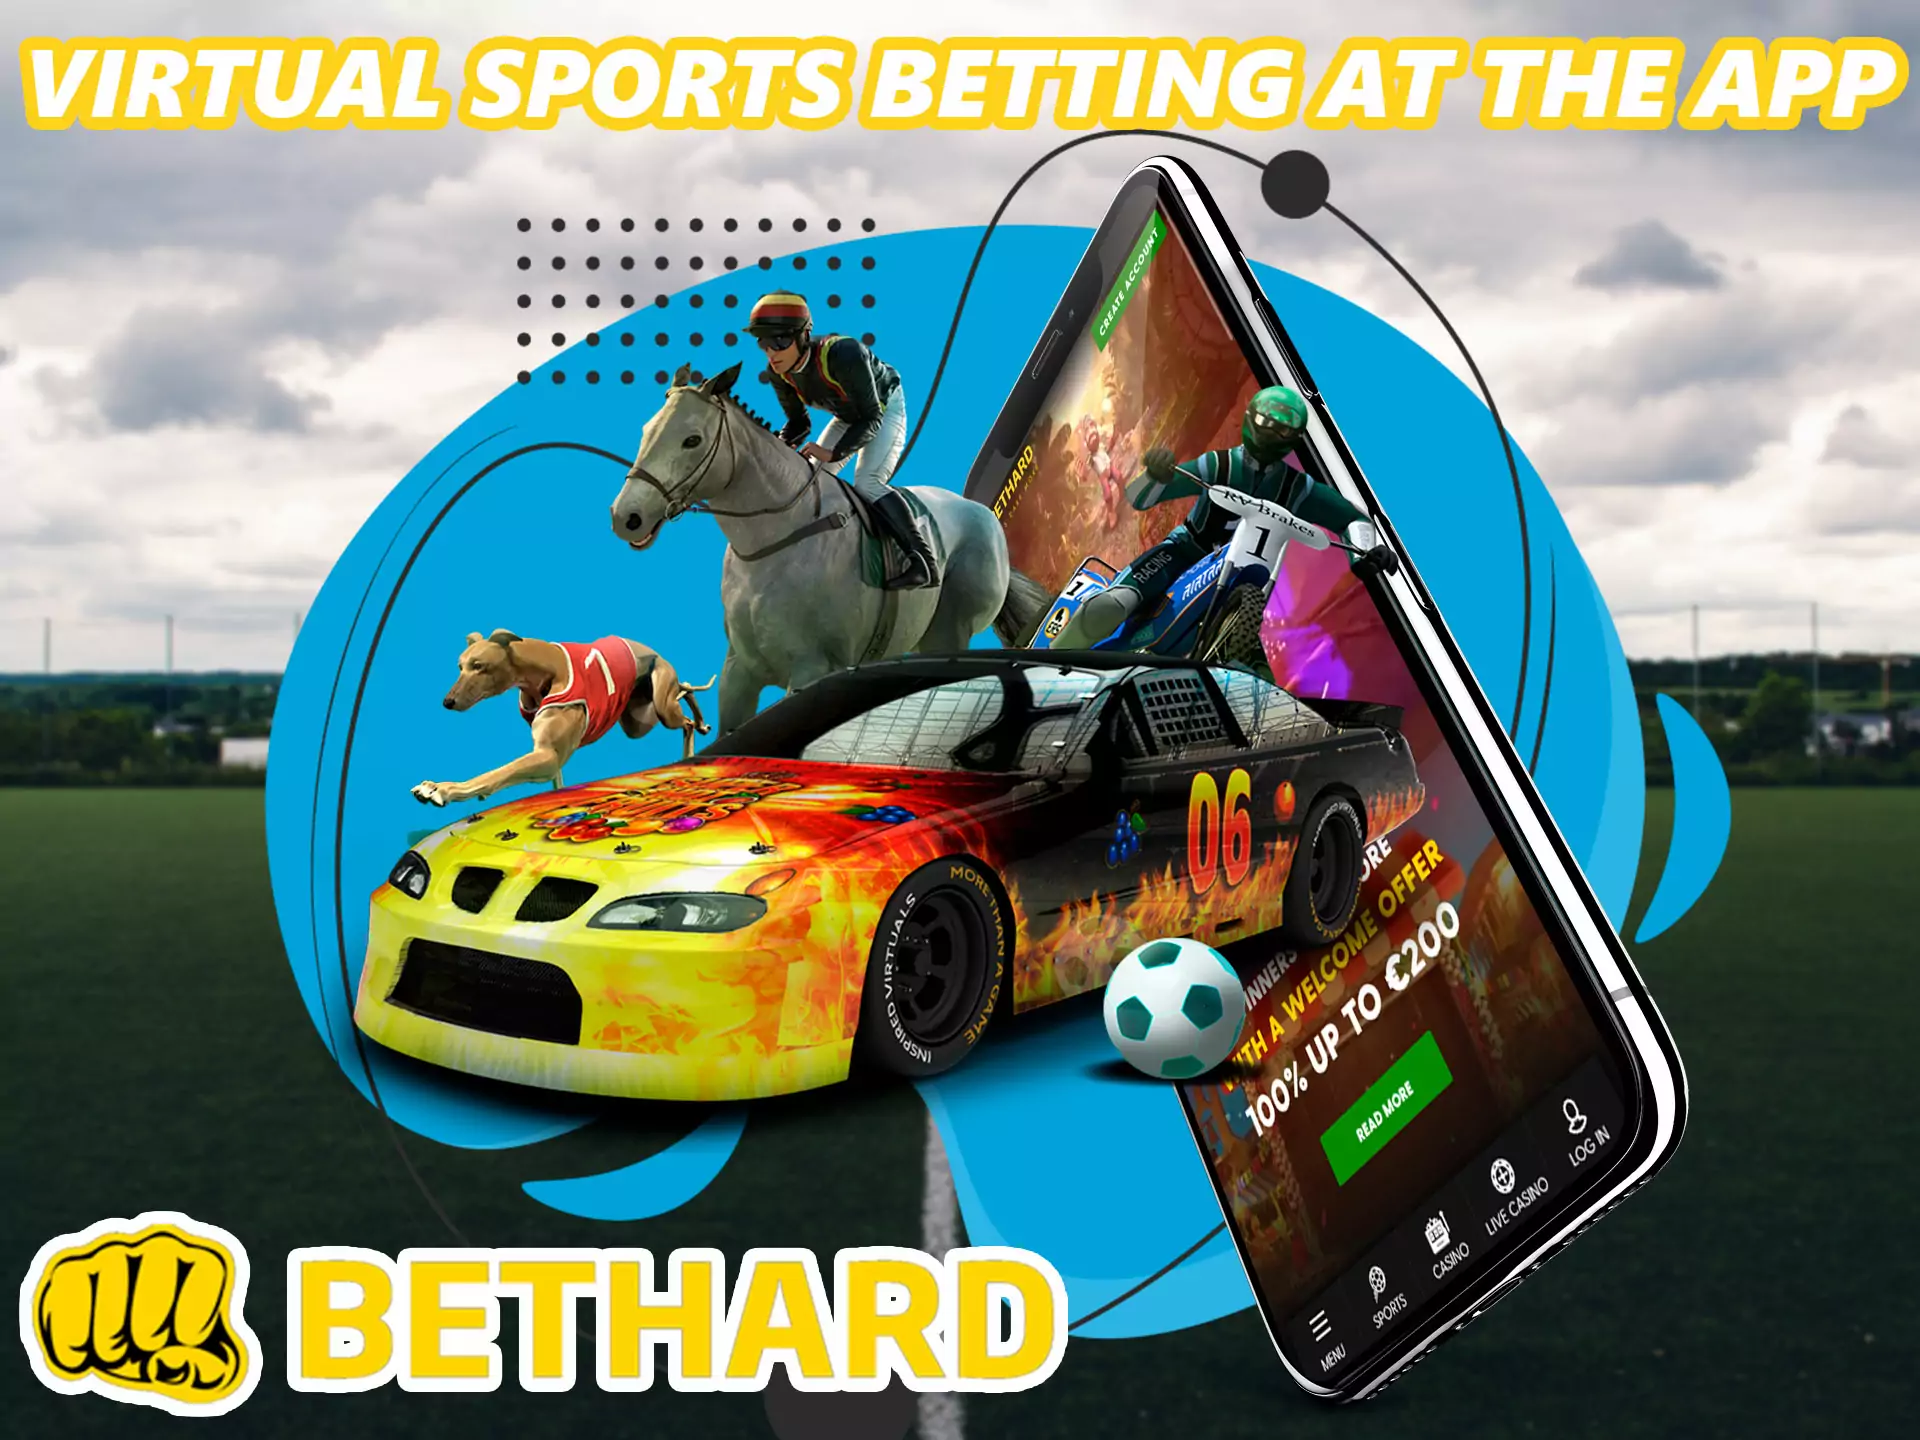 Betting on this fun sport is on the rise, with a wide range of virtual betting disciplines waiting for you.